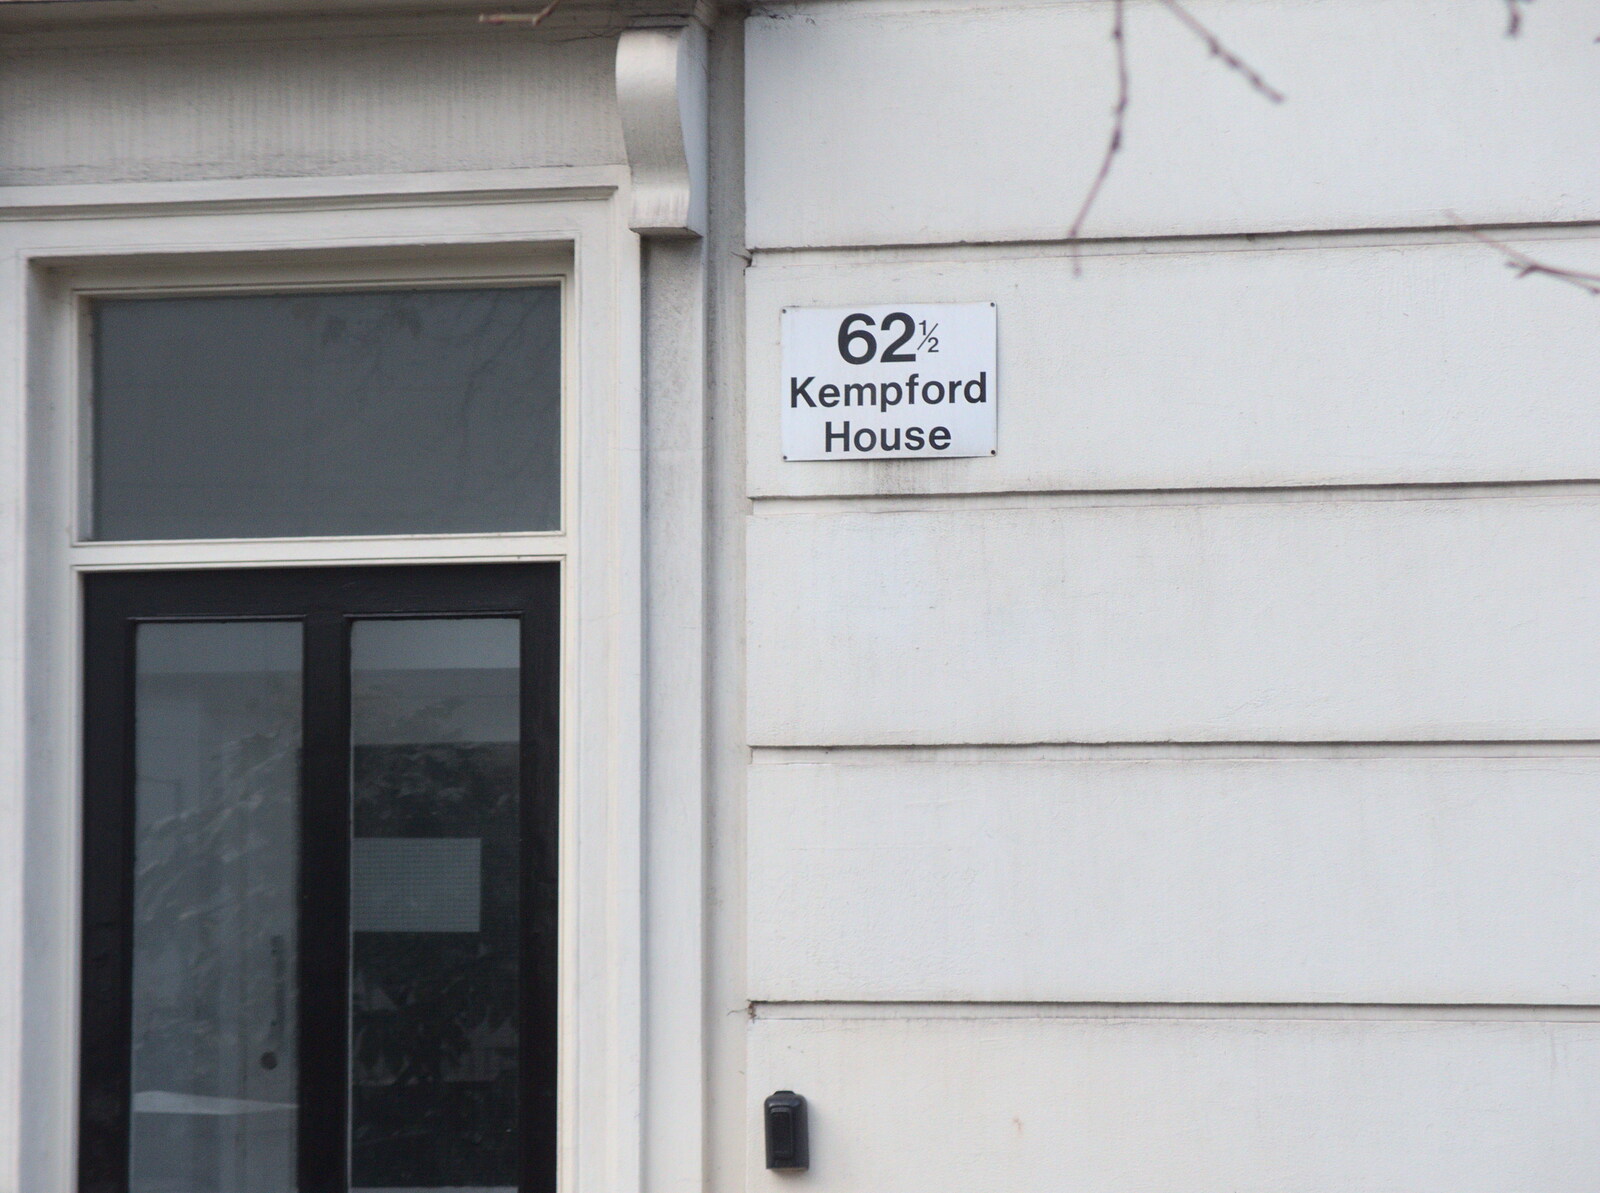 Amusing house number - 62½ Kempford House from A Work Lunch in Nandos, Bayswater Grove, West London - 20th December 2017